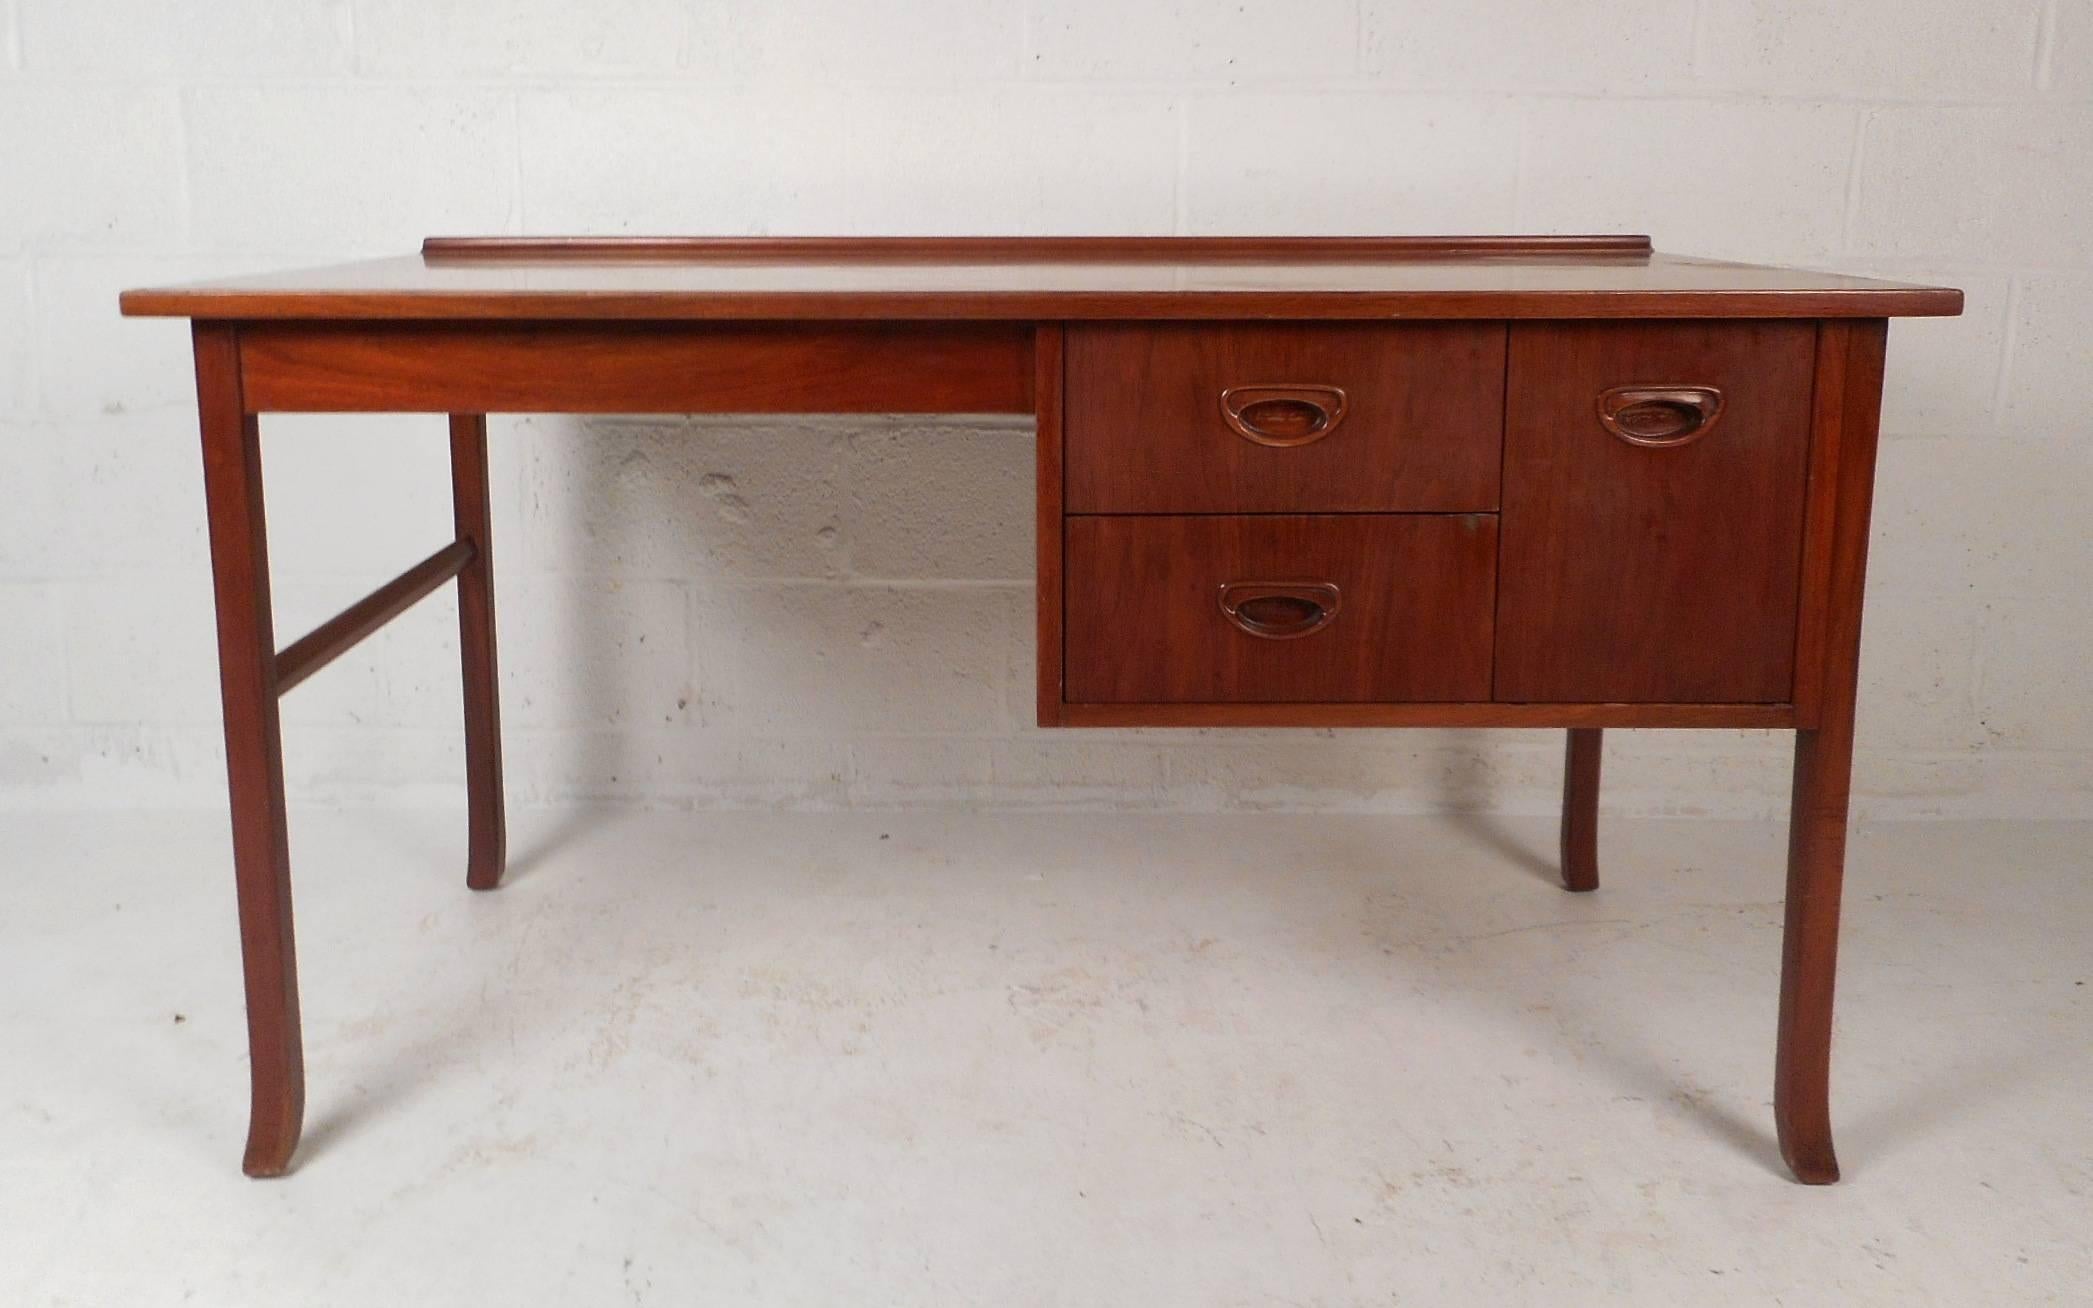 This gorgeous vintage modern desk features a unique raised top along the back and sculpted feet. Sleek design with unusual recessed pulls and a wonderful vintage teak finish. This case piece ensures plenty of room for storage within its three hefty